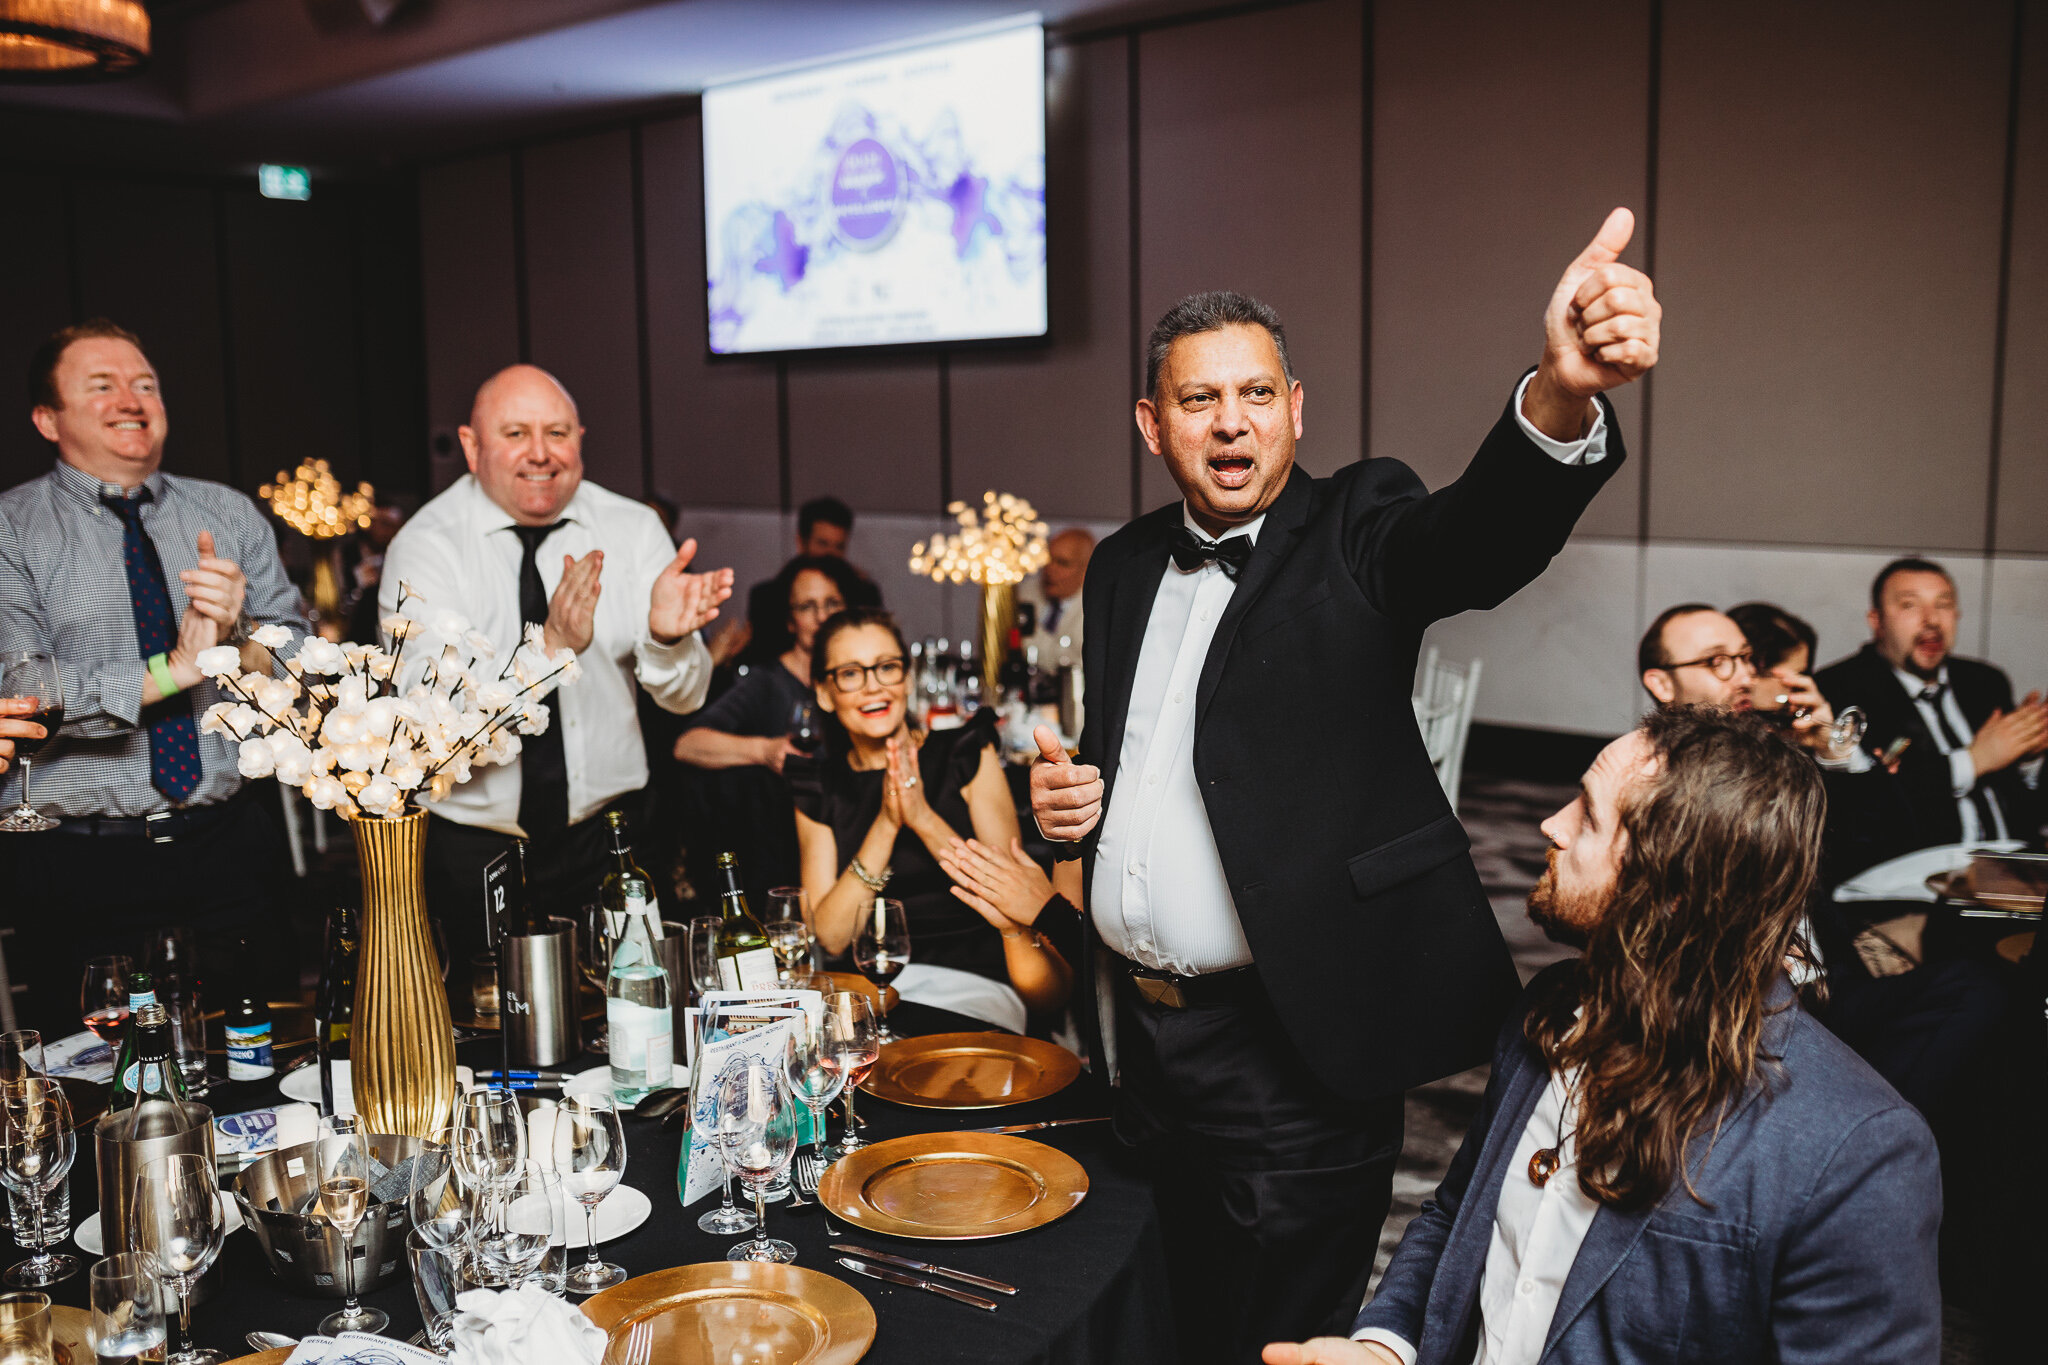 Canberra Event Photography - Enthusiastic man at table